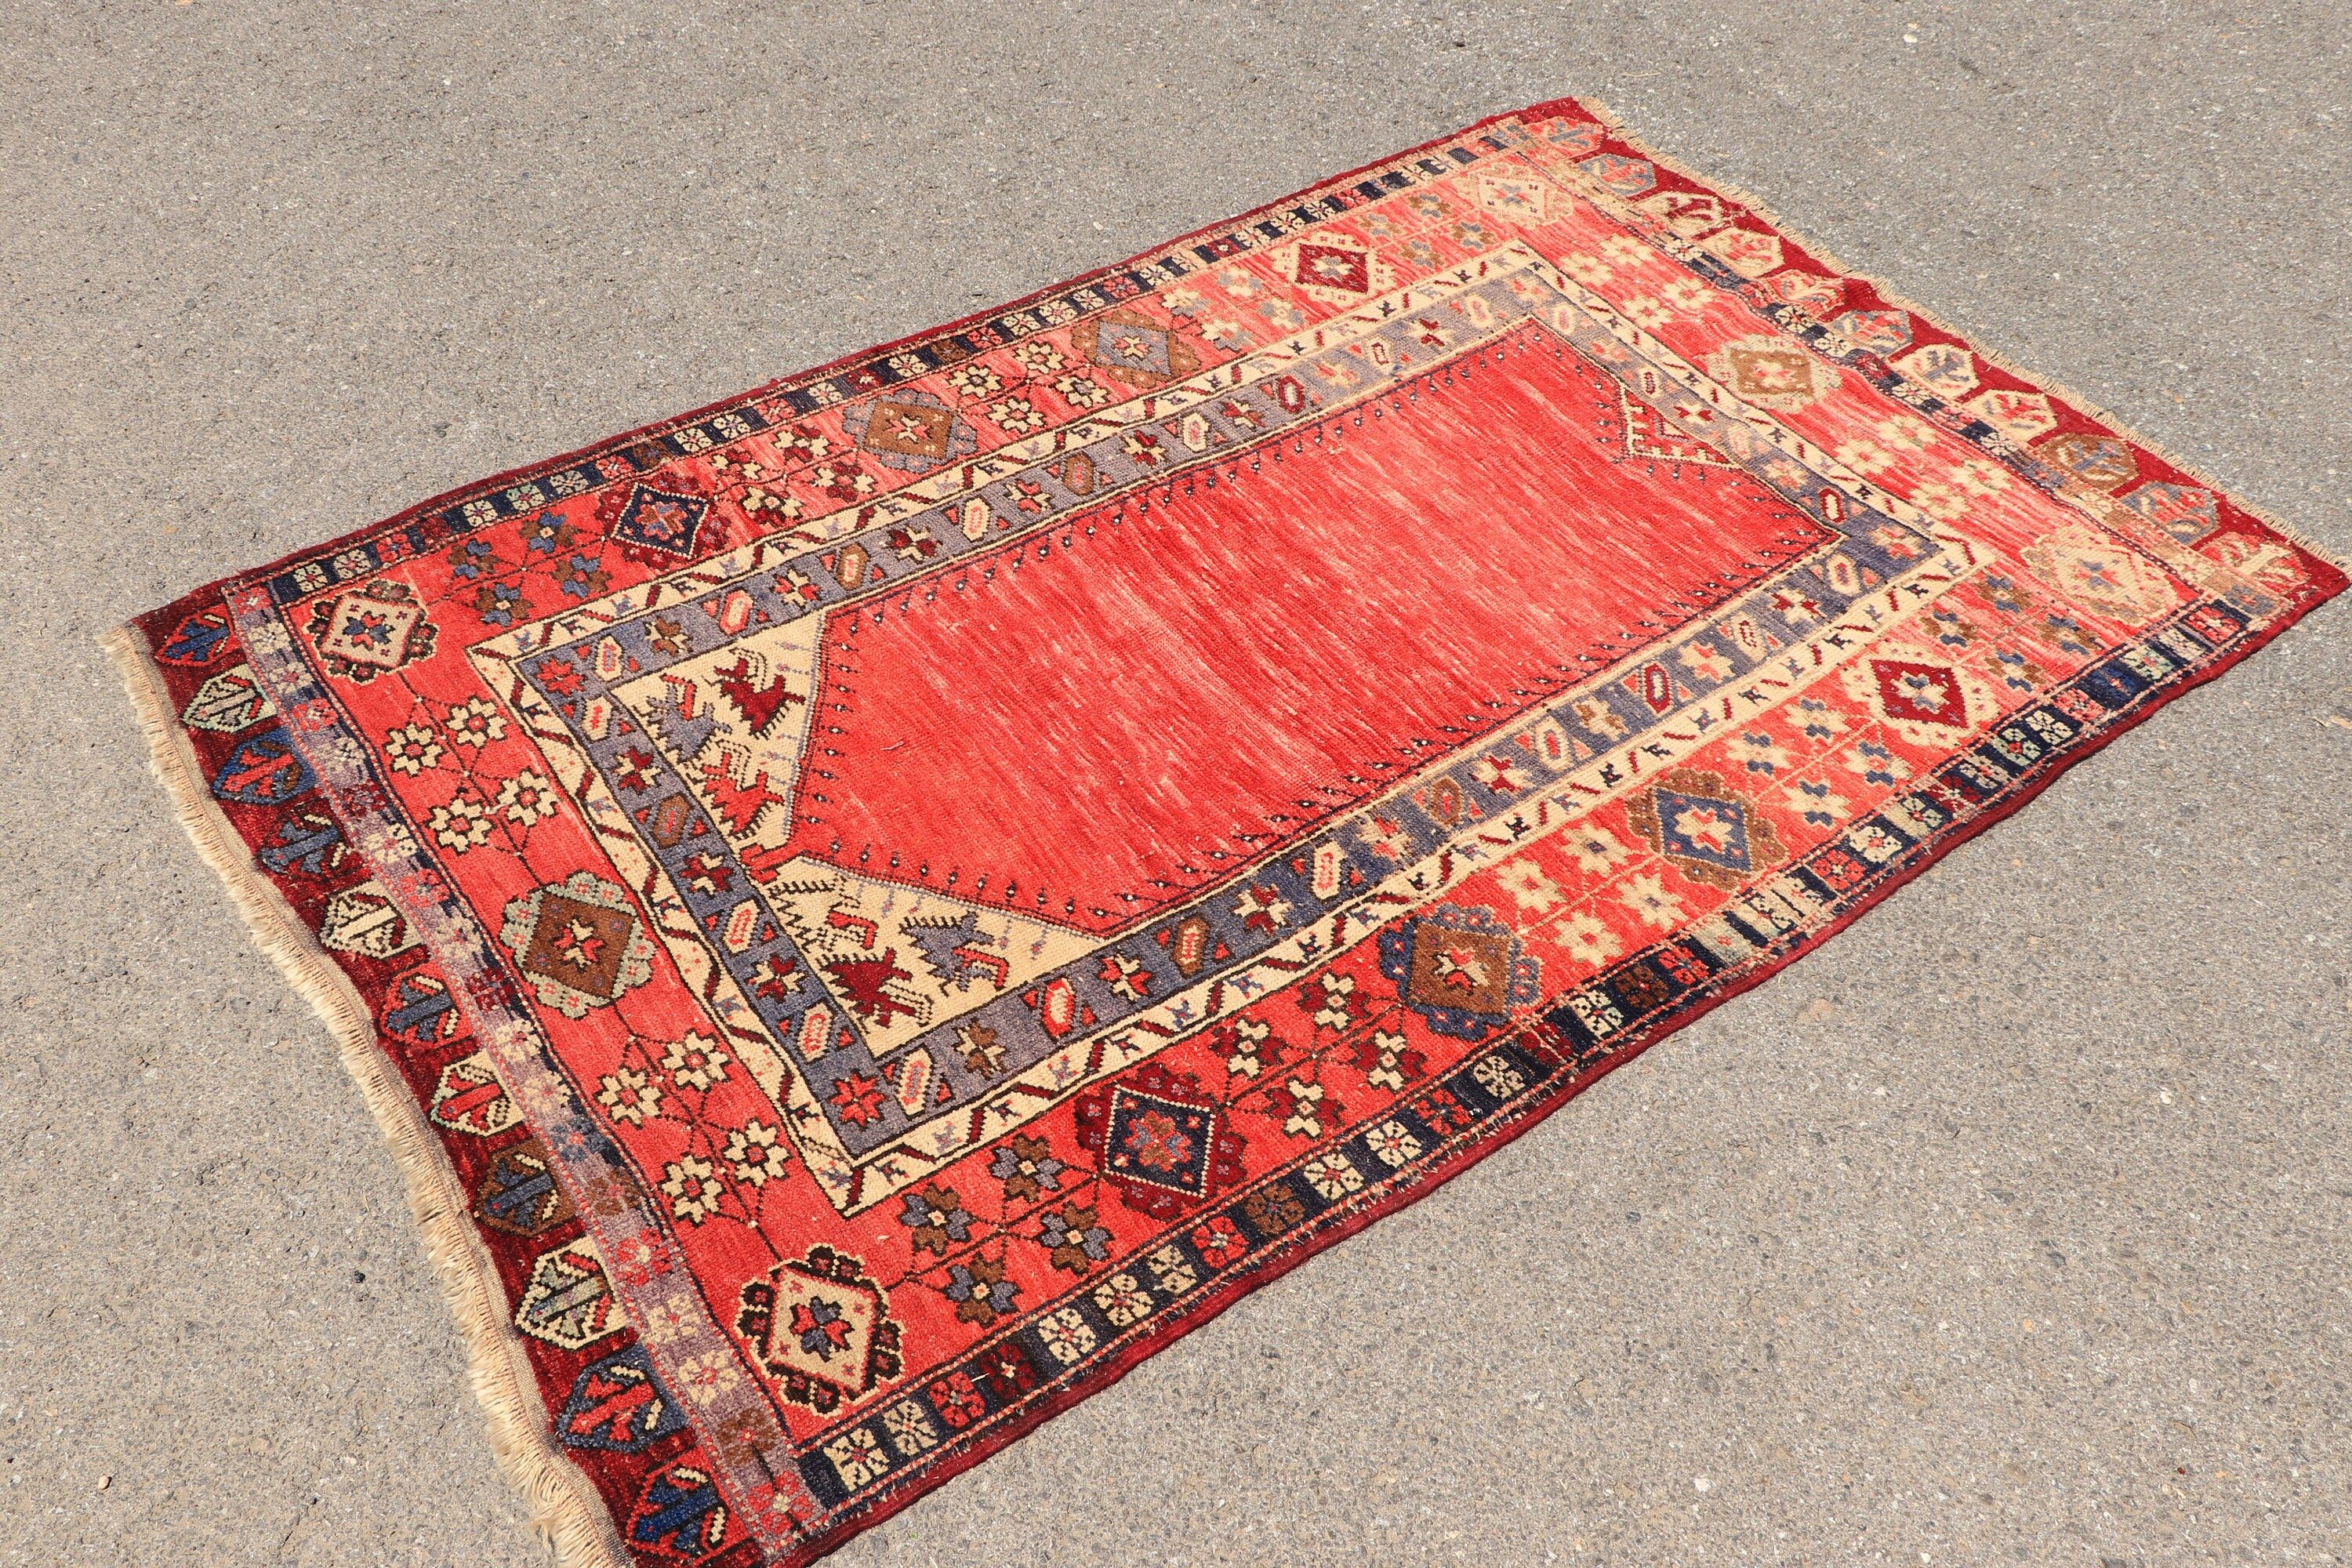 Vintage Rugs, Oushak Rug, Turkish Rug, Art Rug, 4x6.2 ft Area Rugs, Floor Rugs, Kitchen Rugs, Rugs for Kitchen, Red Anatolian Rugs